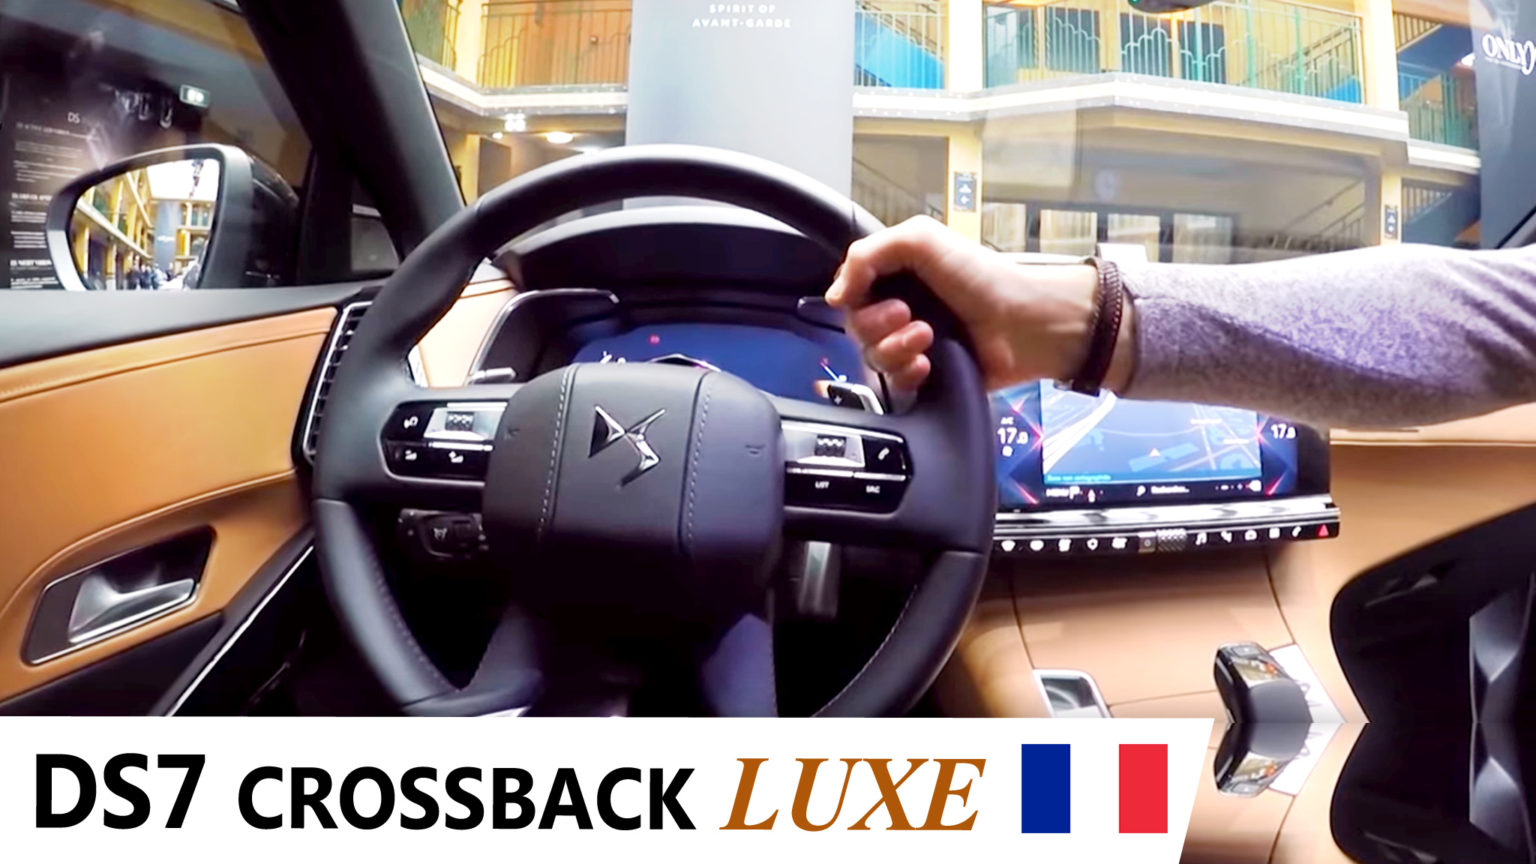 ds7 crossback interieur 2018 so chic Opéra